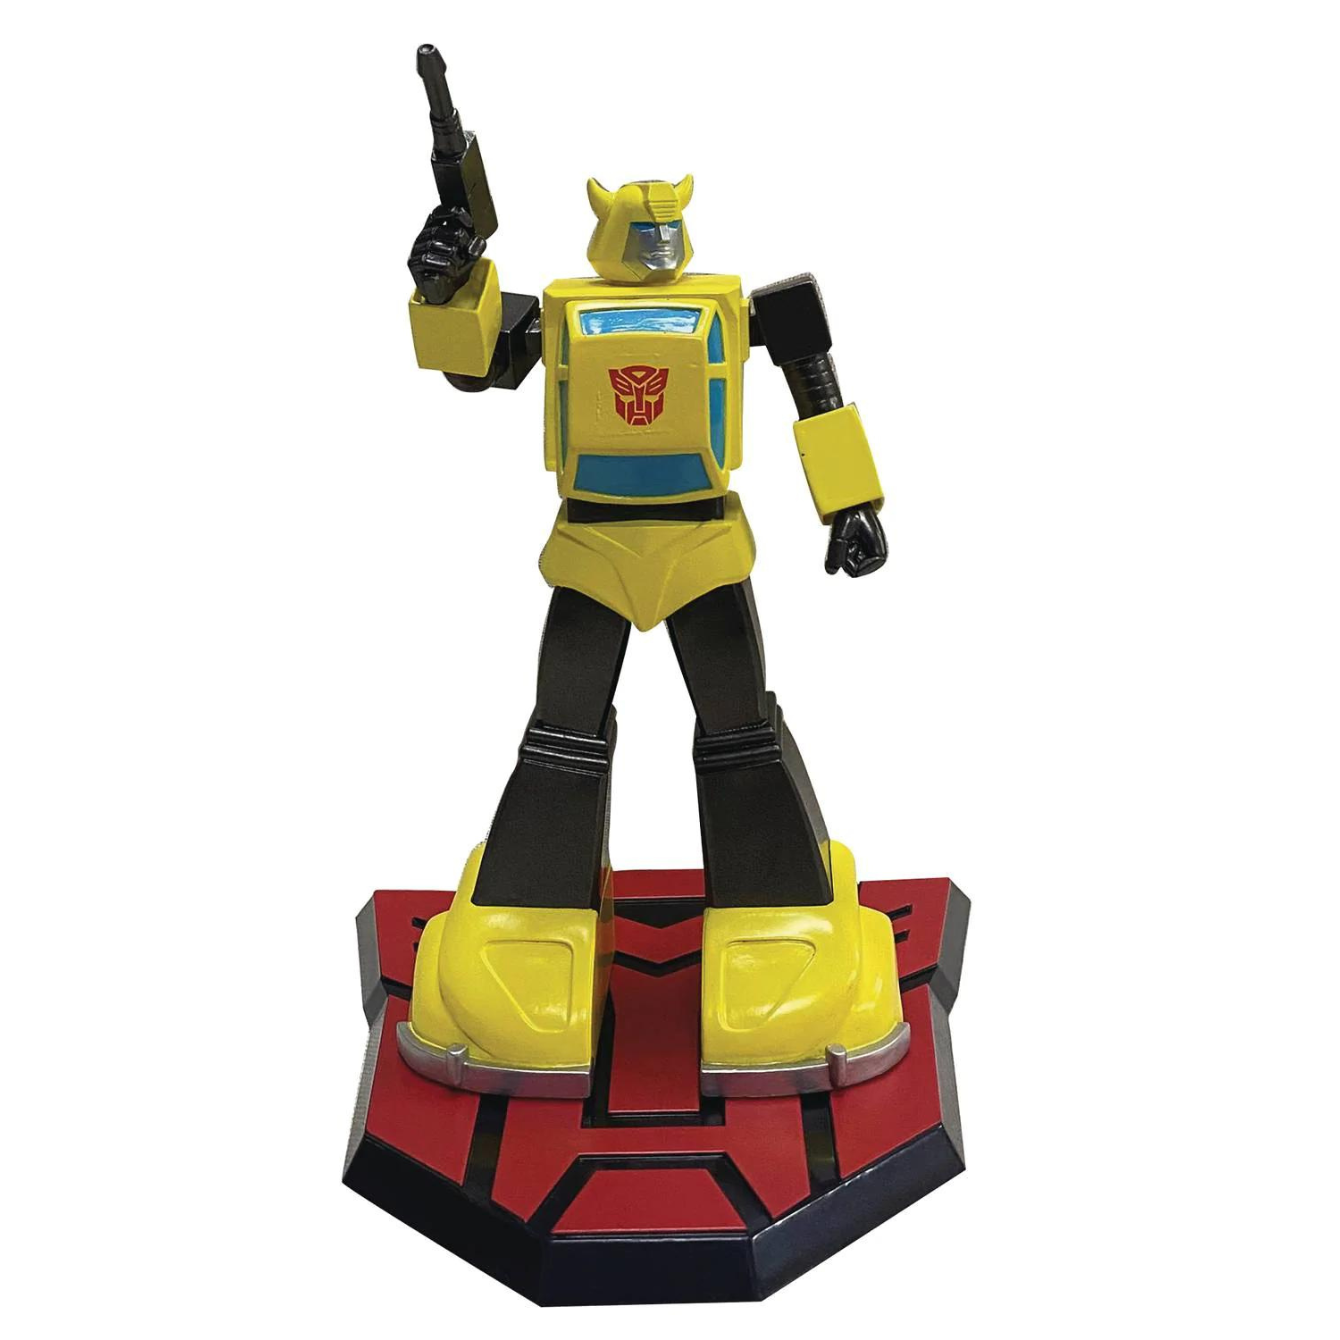 Transformers 9-Inch PVC Statue - Bumblebee